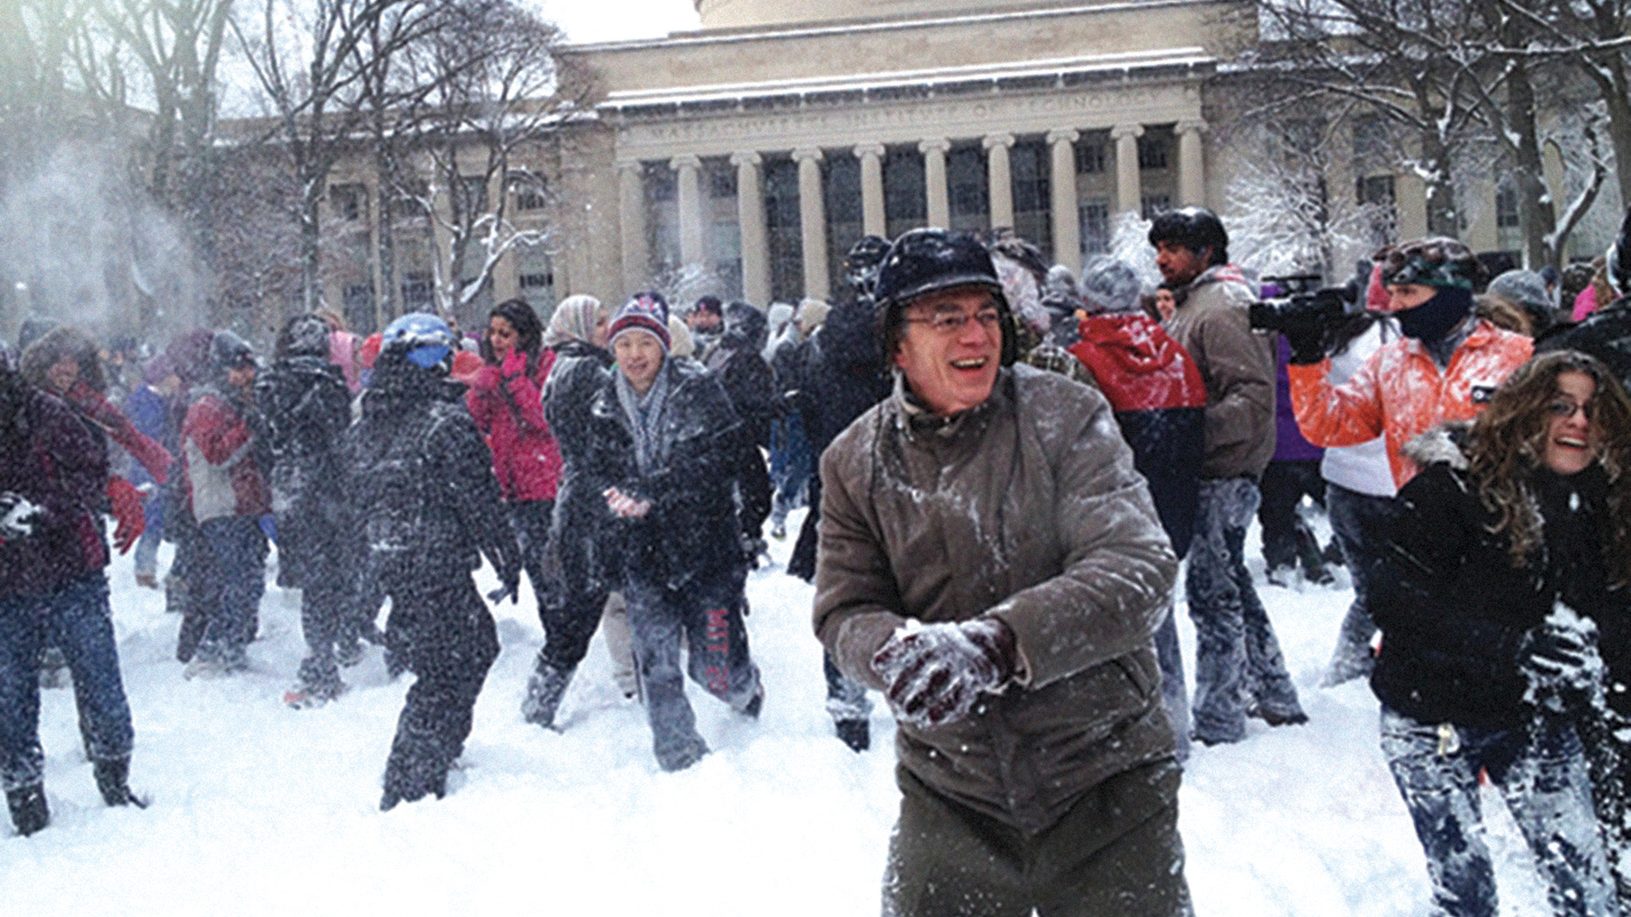 Reif about to throw a snowball in a campus snowball fight